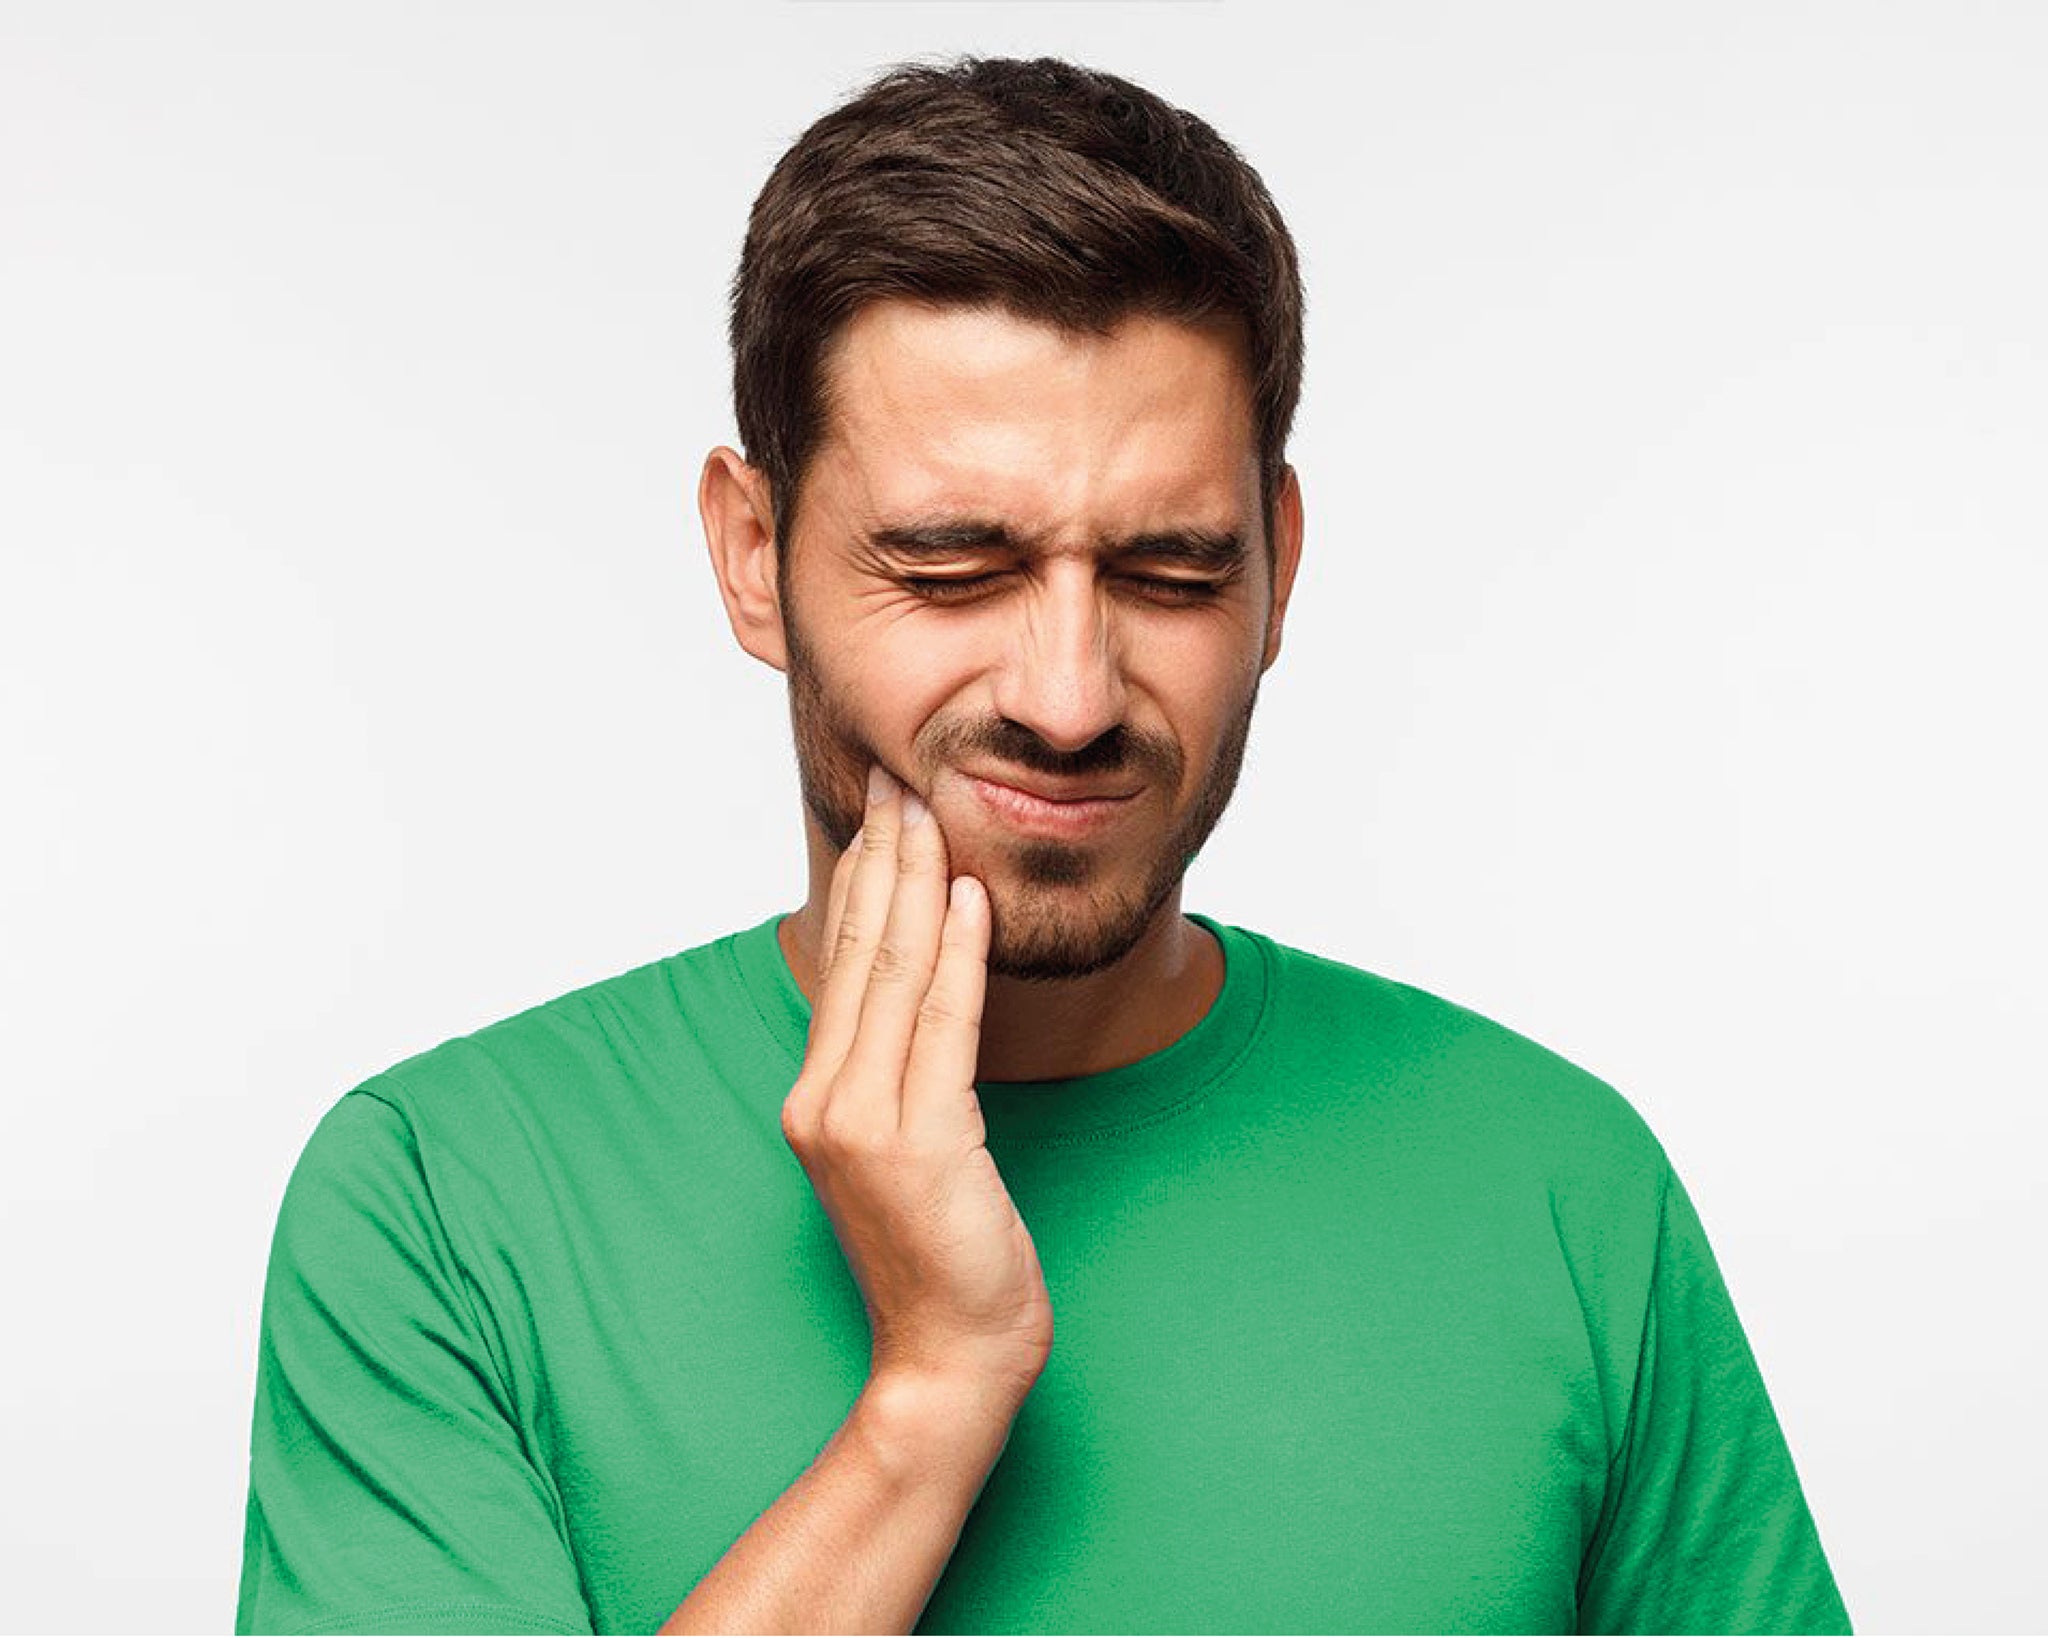 Man-with-toothache-green-t-shirt-brown-hair